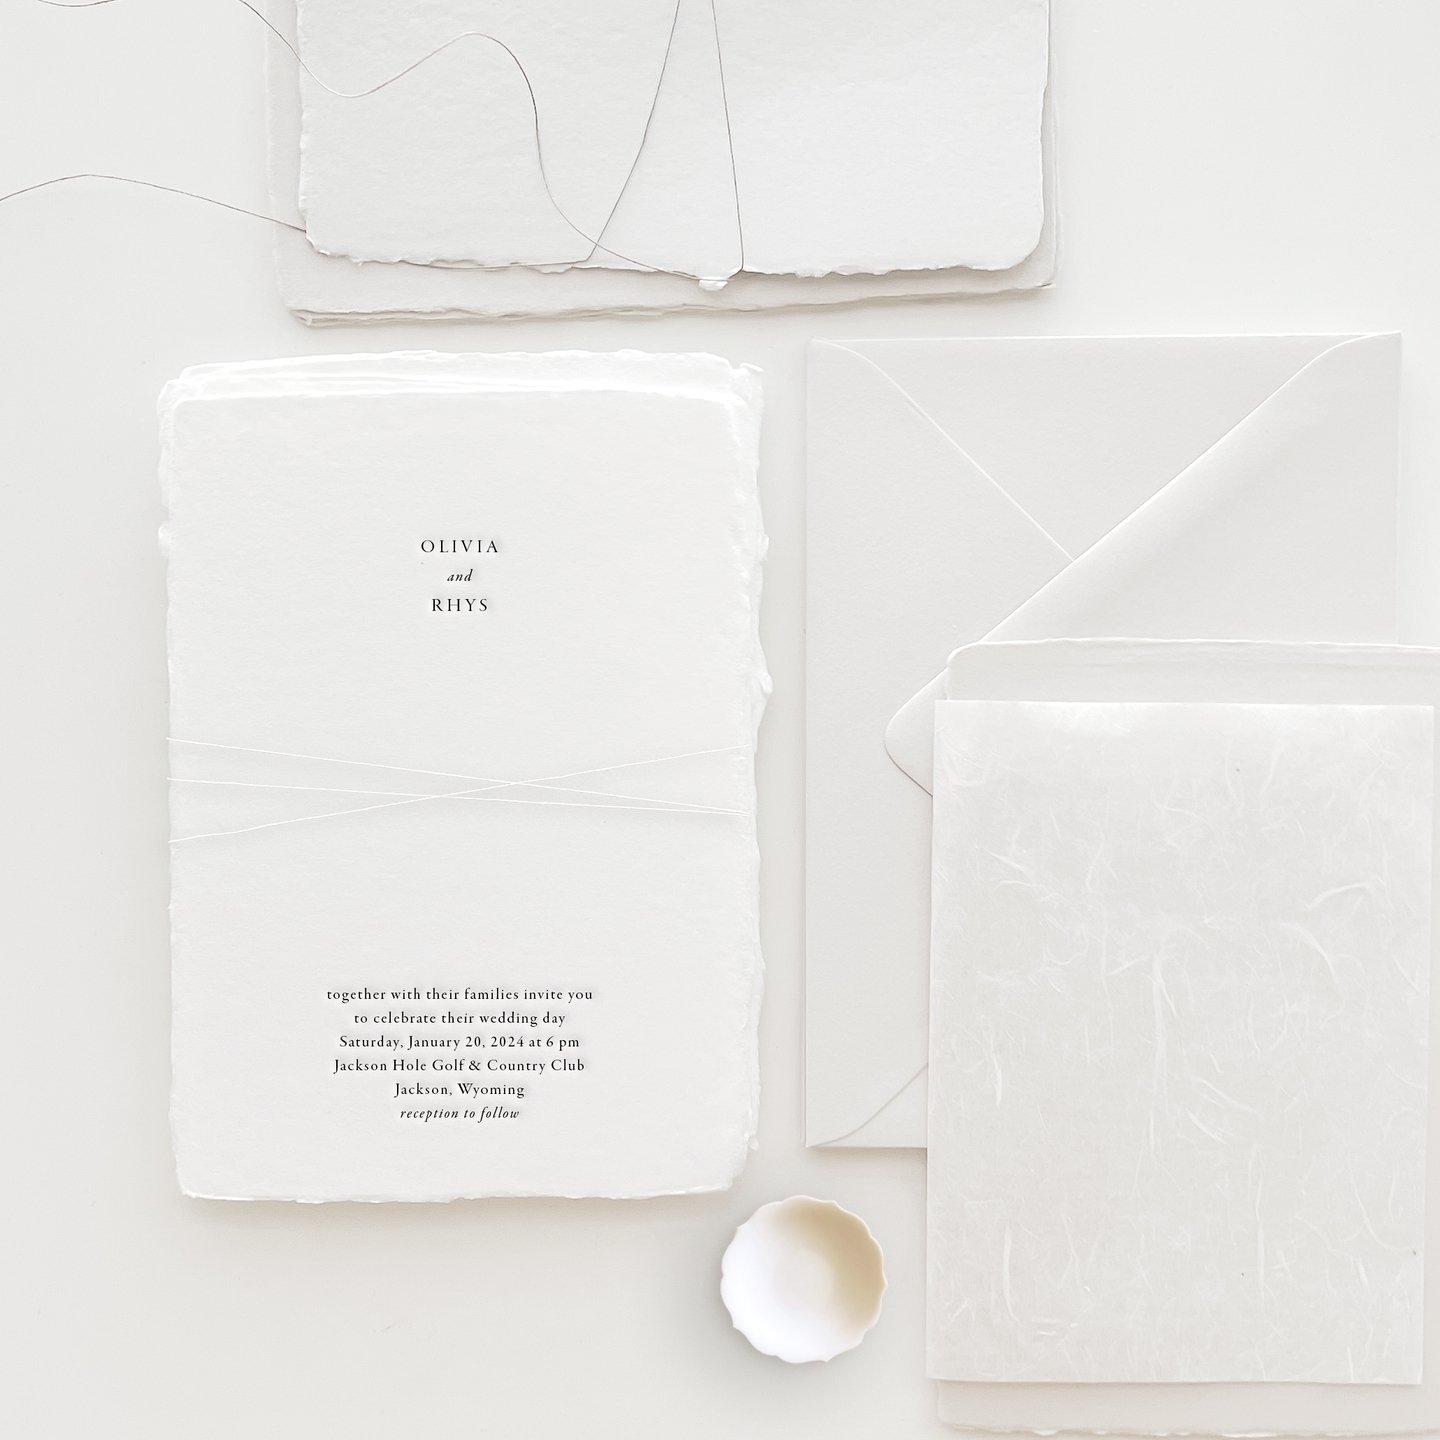 With our new website, you can now choose double the handmade paper options that we had before! This is our vintage white paper (type b) along with our new beige paper (type b).